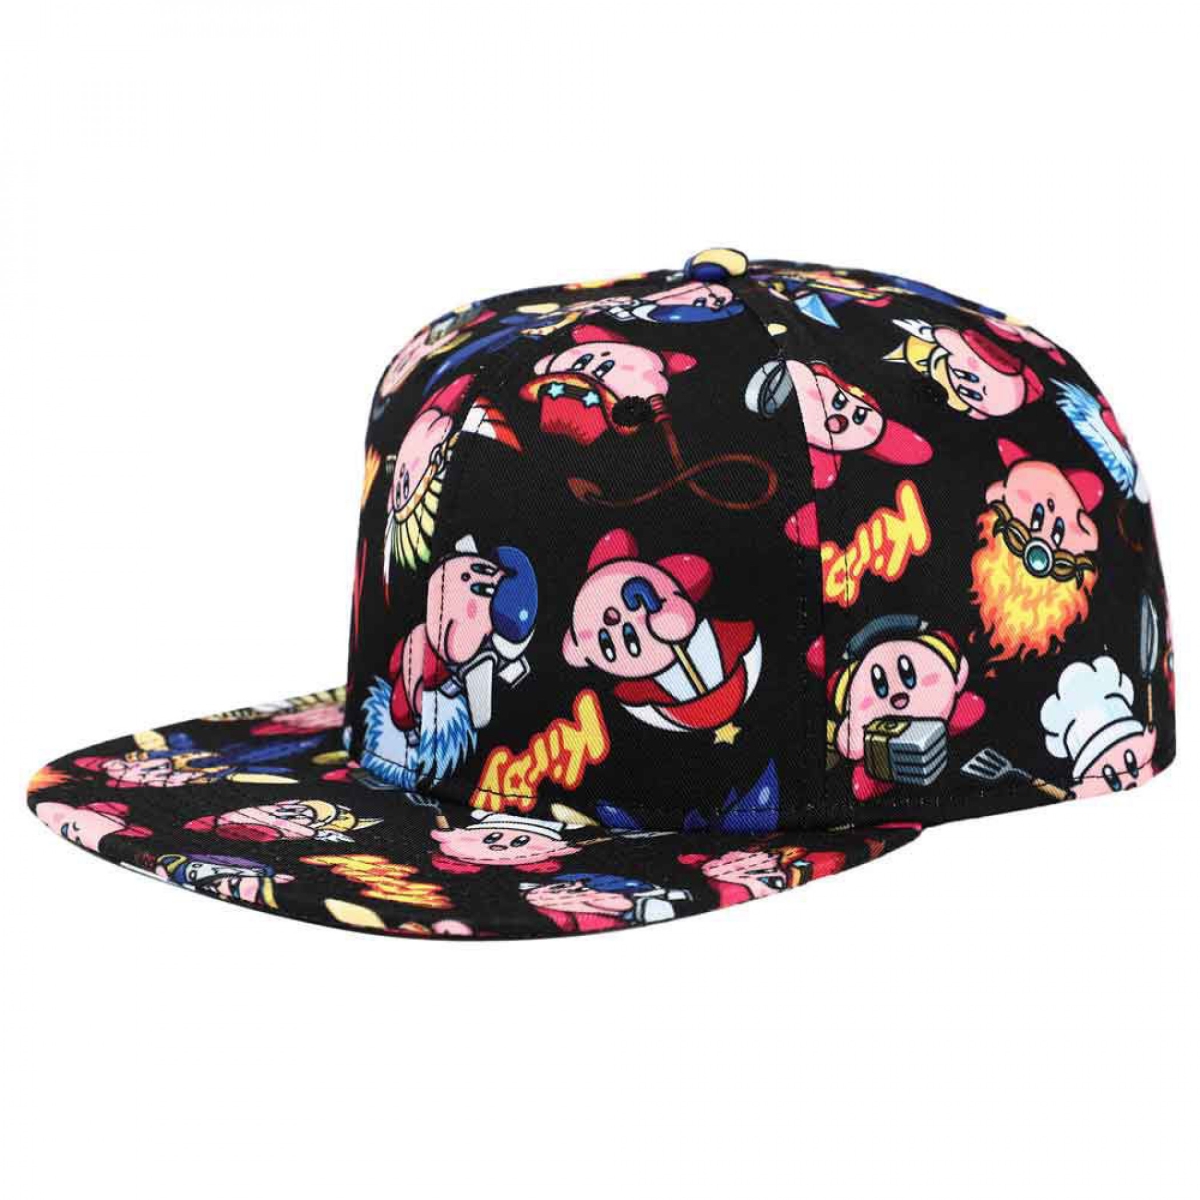 Picture of Kirby 845253 Nintendo Power-Ups AOP Sublimated Flat Bill Snapback Hat